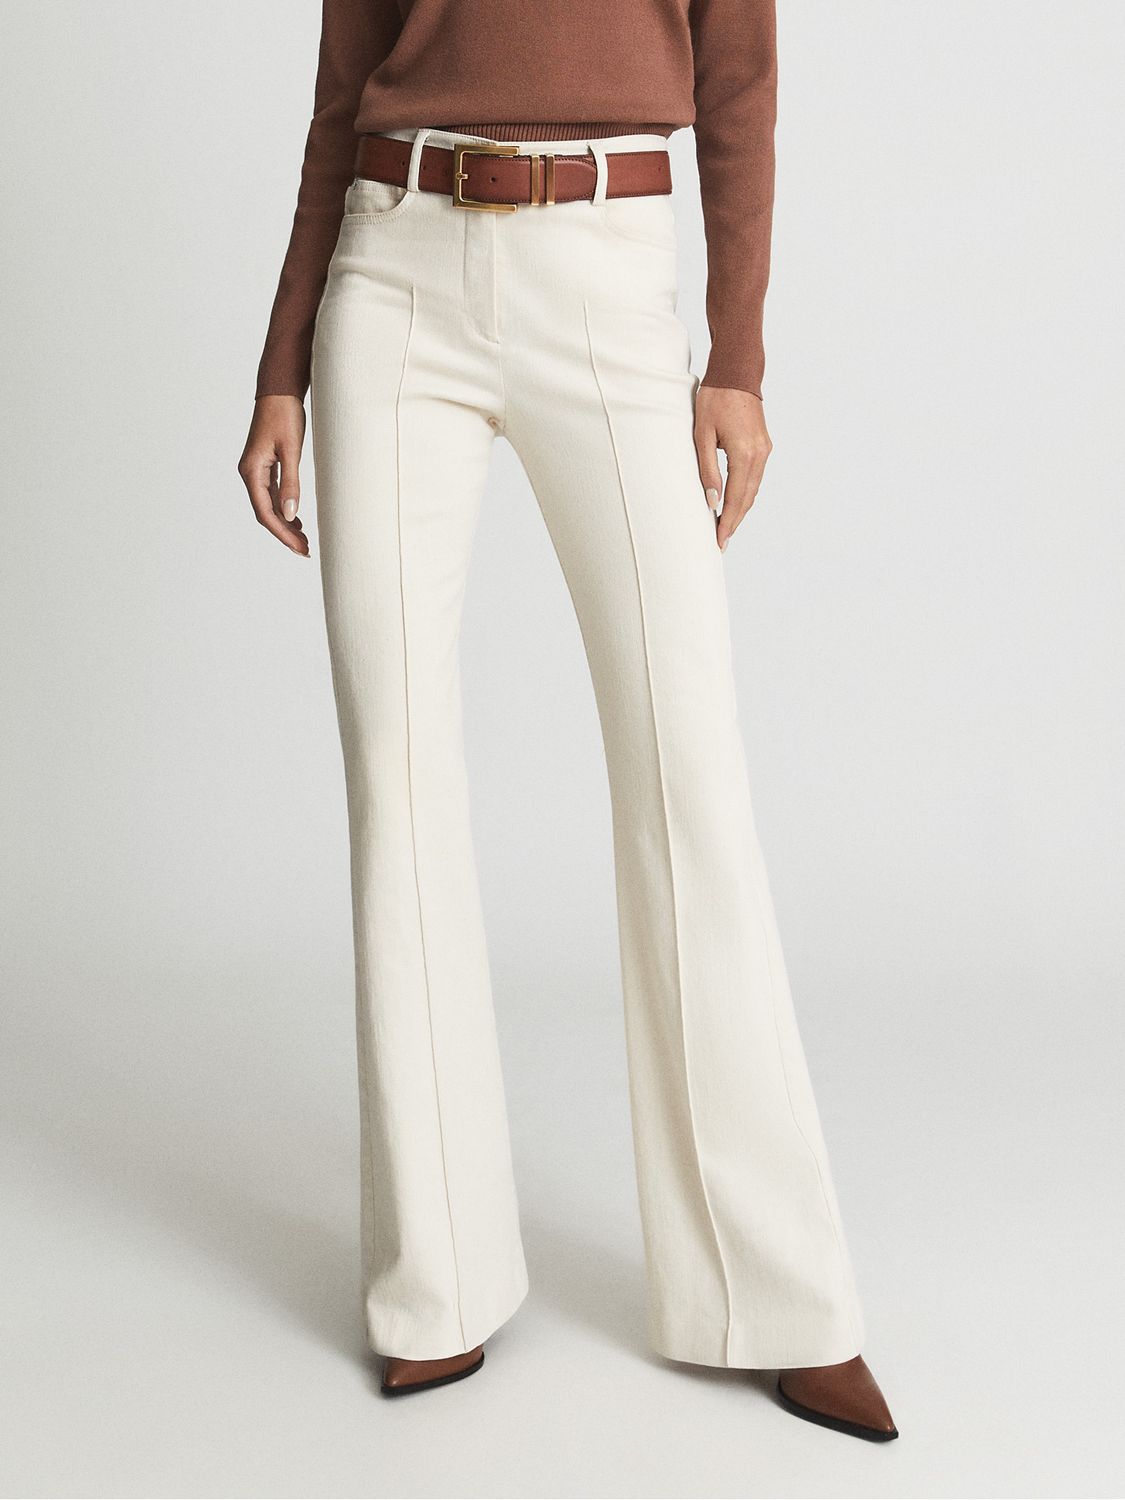 Reiss Florence Flared Trousers, Cream, 6